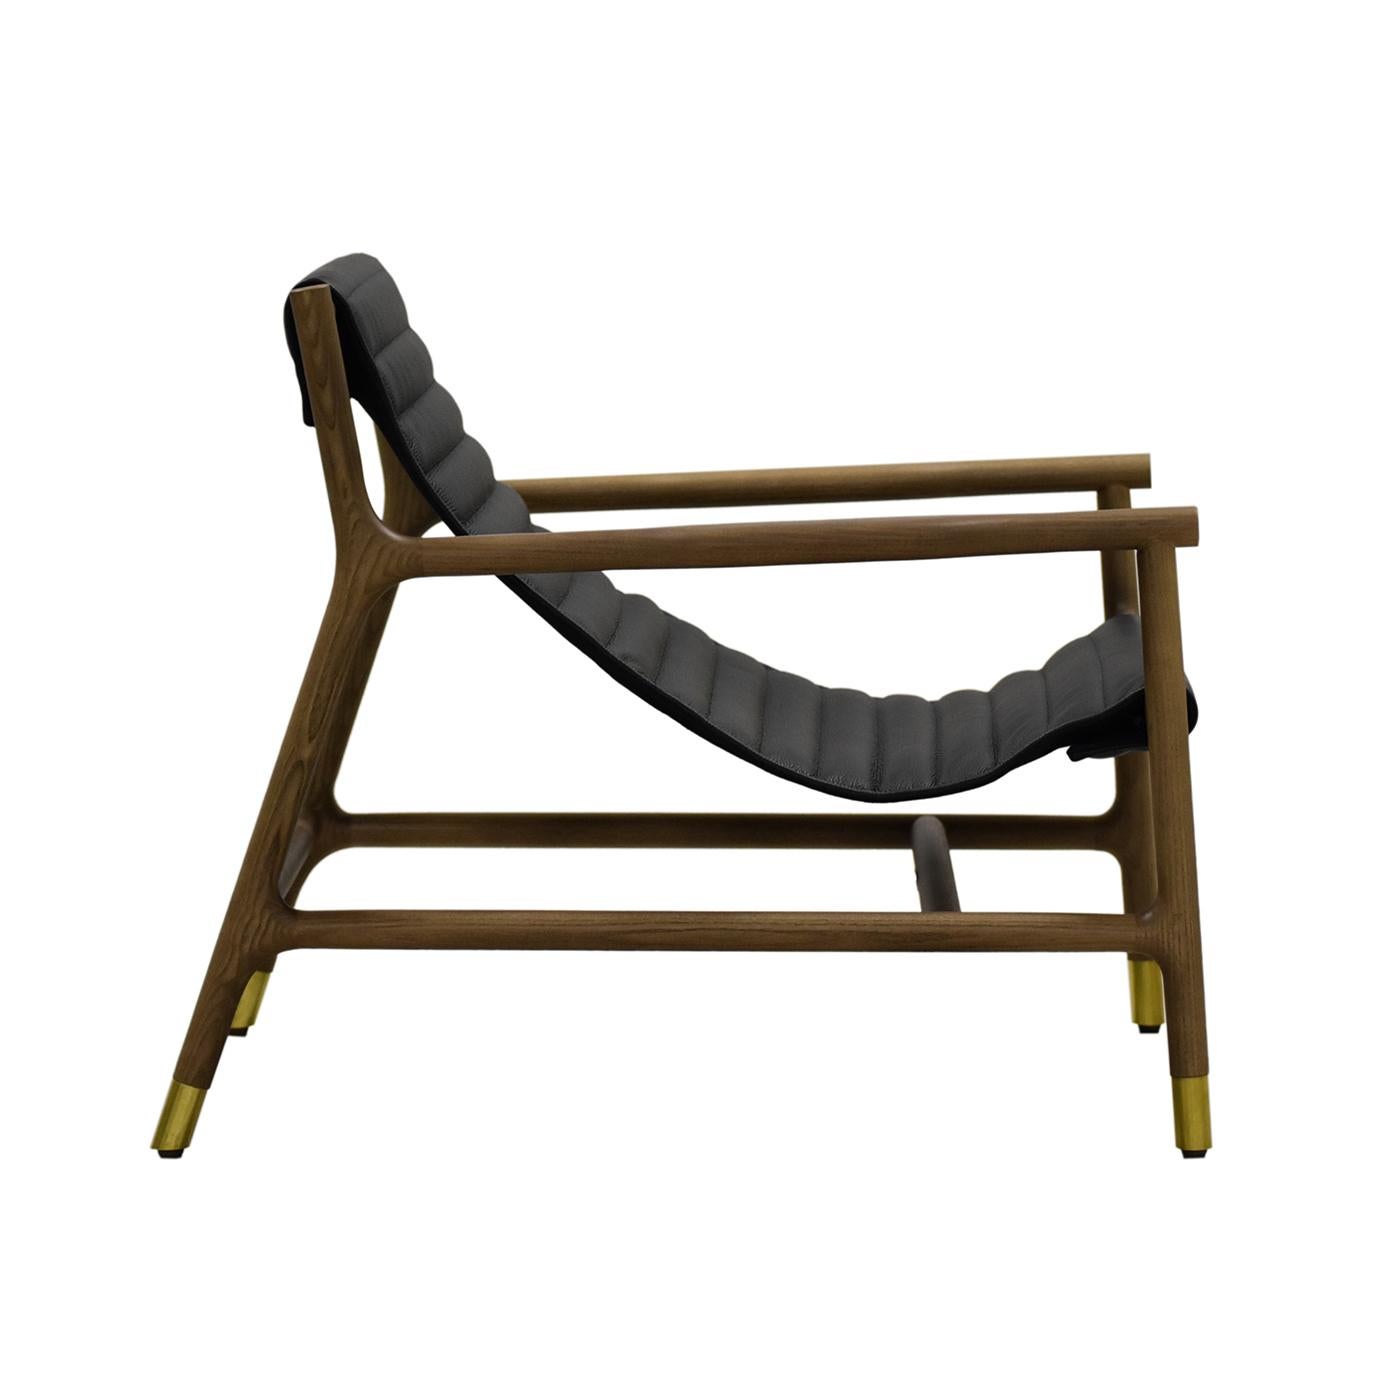 A squared, lightweight frame in solid ash supports the outstanding component of this exclusive lounge chair. Its anatomical seat is upholstered with quilted leather to offer an unparalleled sitting experience. Perfect to relax, this piece will add